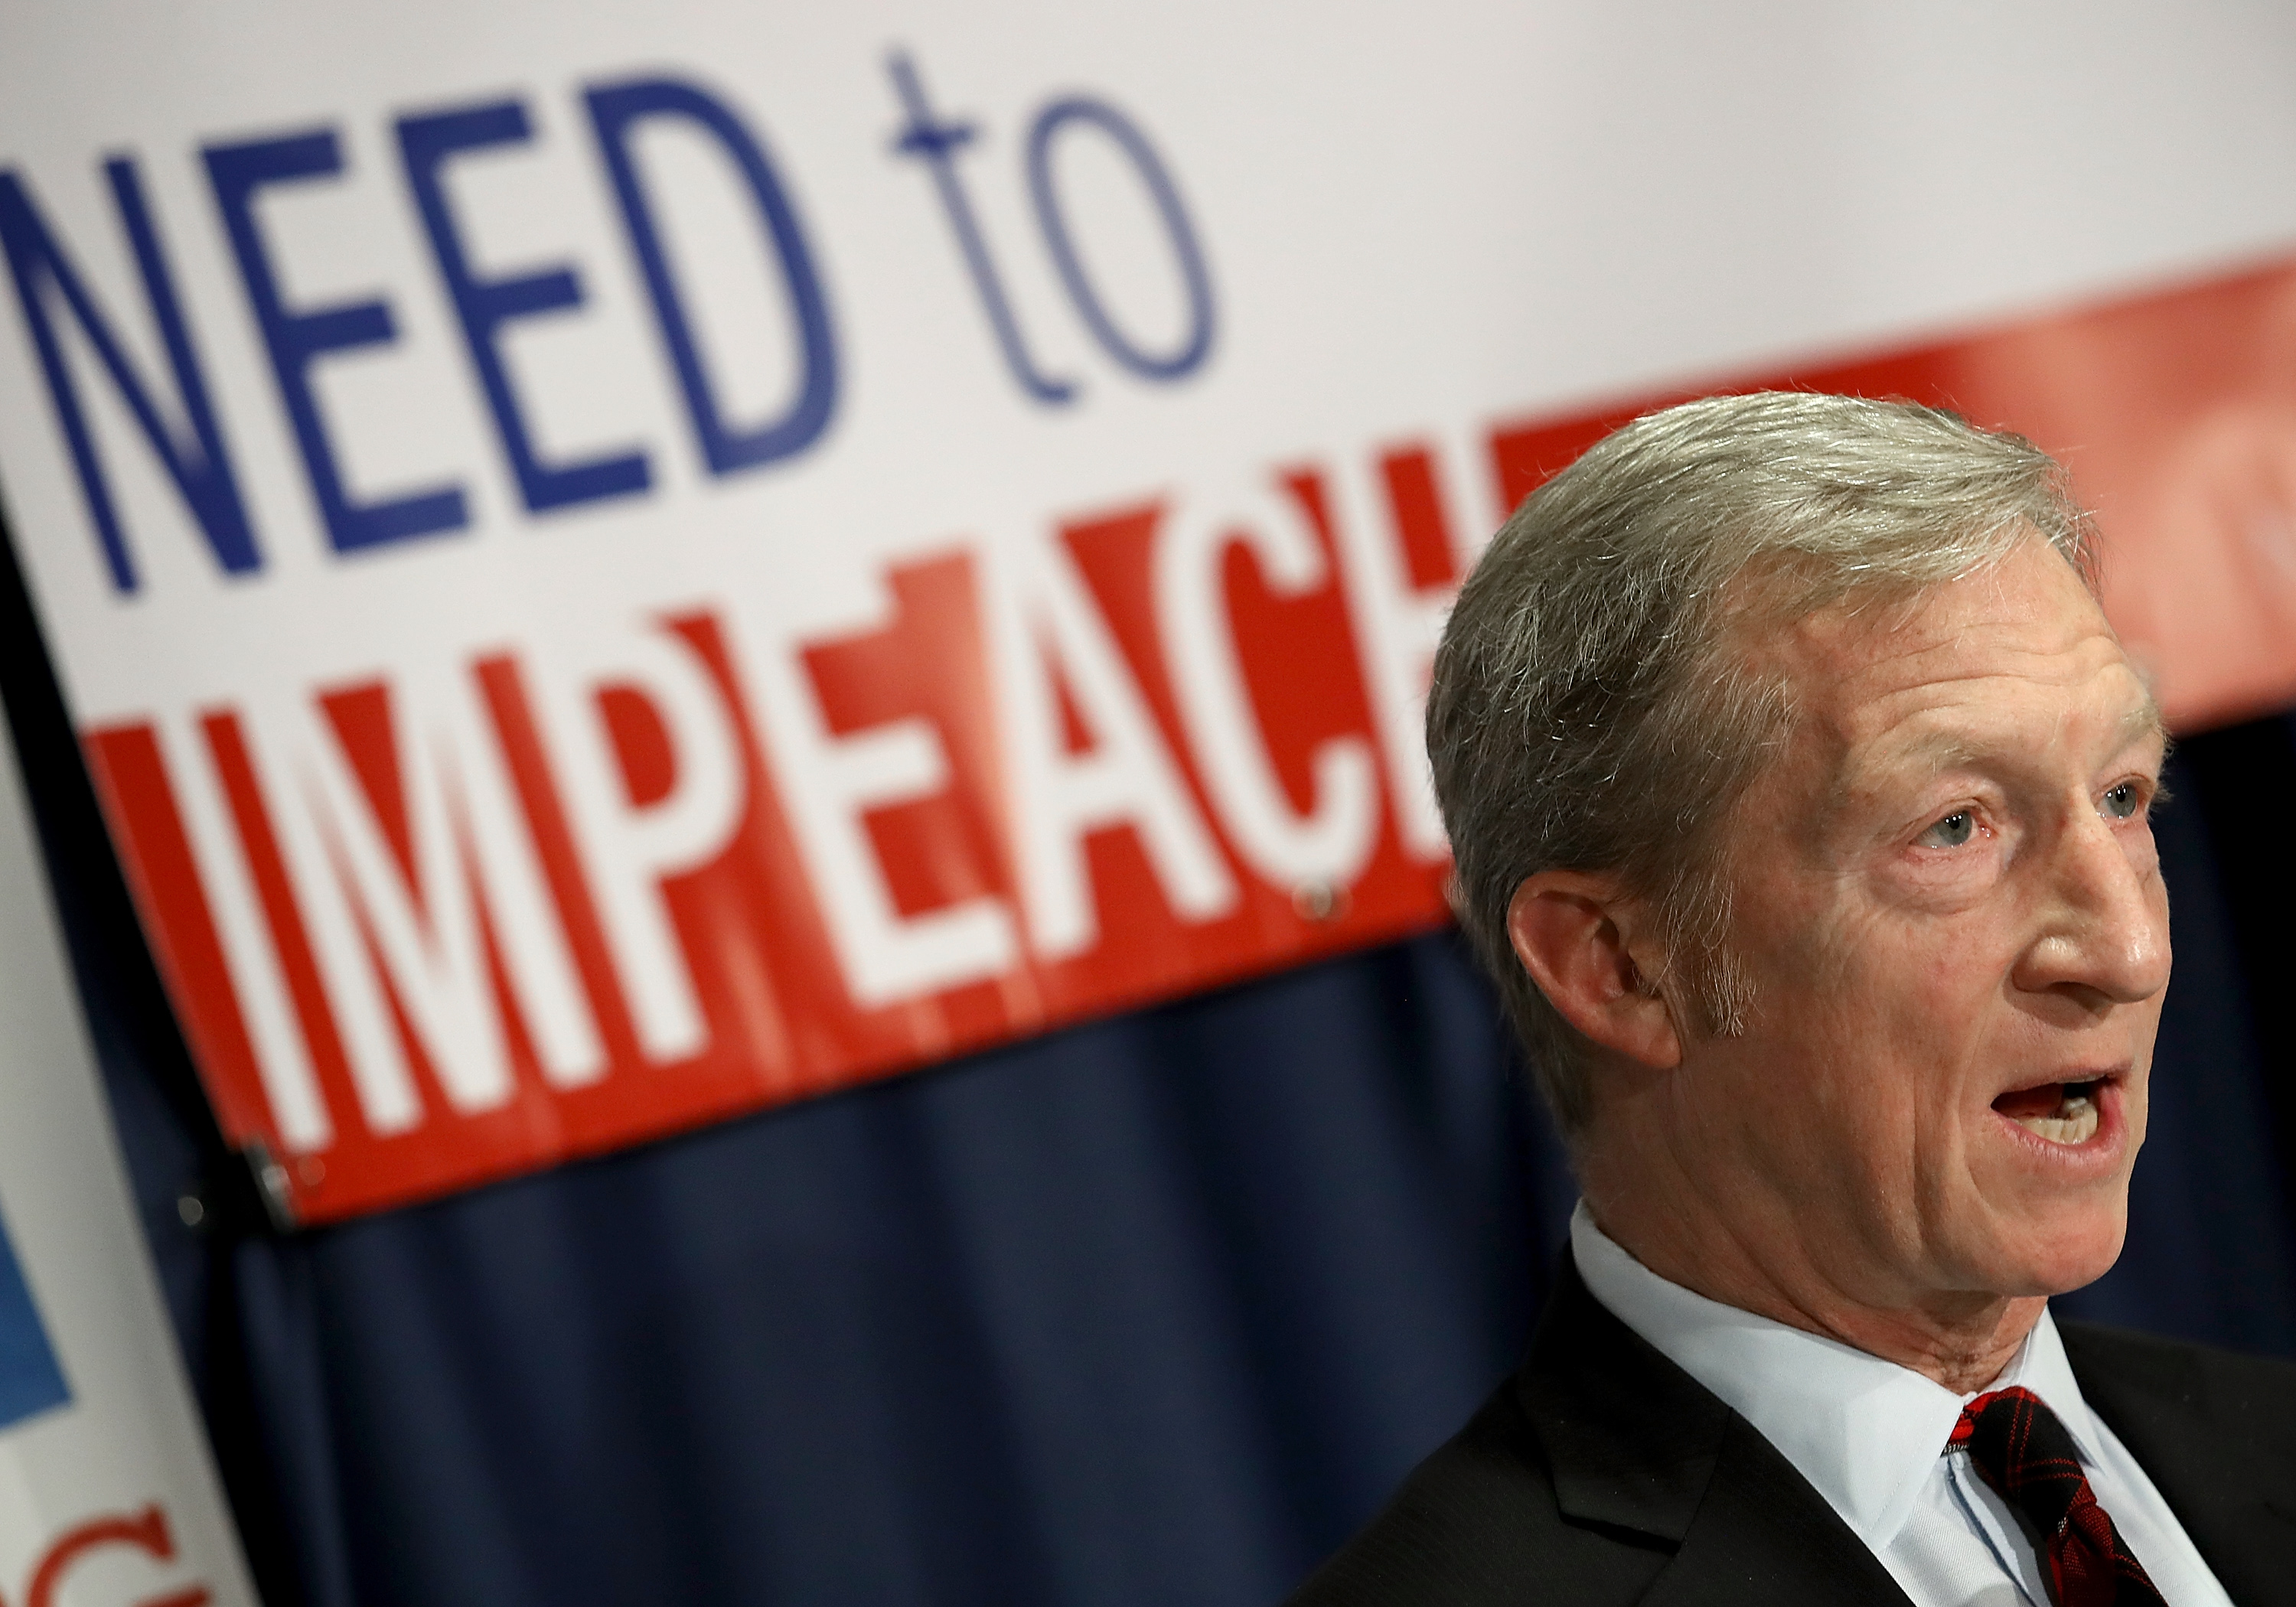 Billionaire hedge fund manager and philanthropist Tom Steyer speaks during a press conference at the National Press Club December 6, 2017 in Washington, DC. Steyer, founder of the "Need To Impeach" initiative, presented legal grounds calling for the impeachment investigation of U.S. President Donald Trump during the press conference.